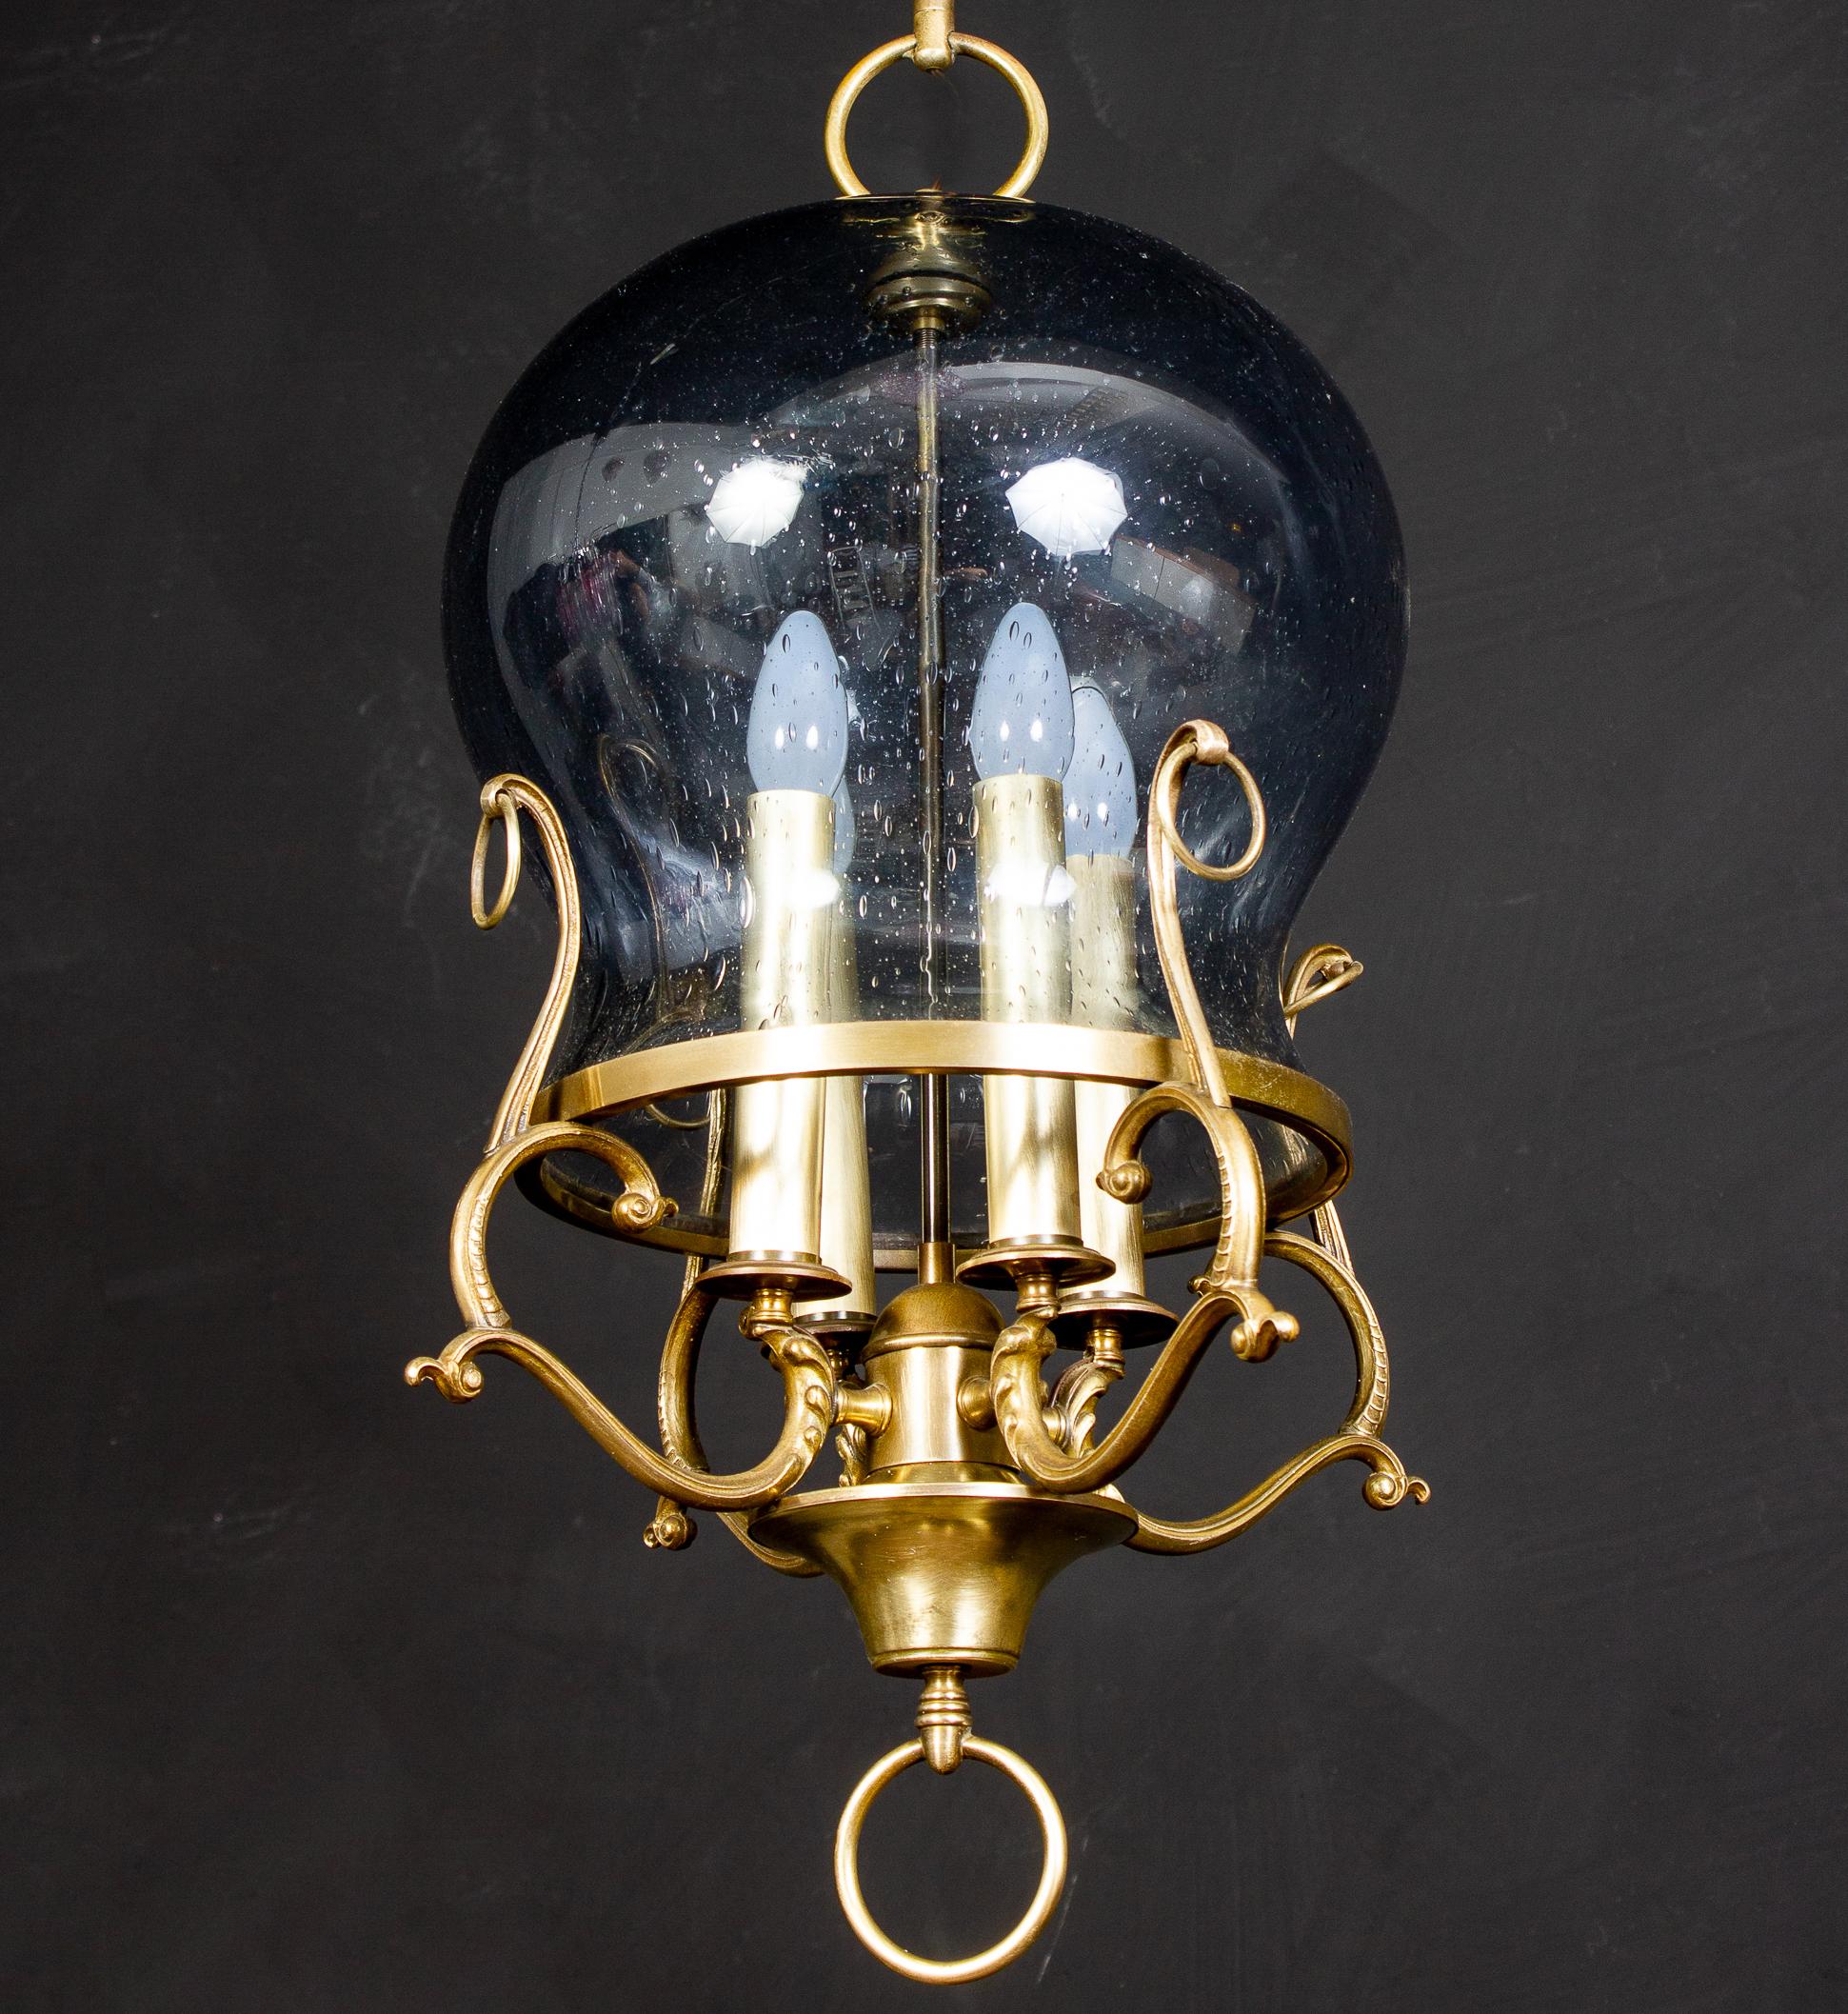 Amazing Italian midcentury brass and light blue Murano glass lantern or pendant.
Four E 14 light bulbs. We can wire for your country standards.